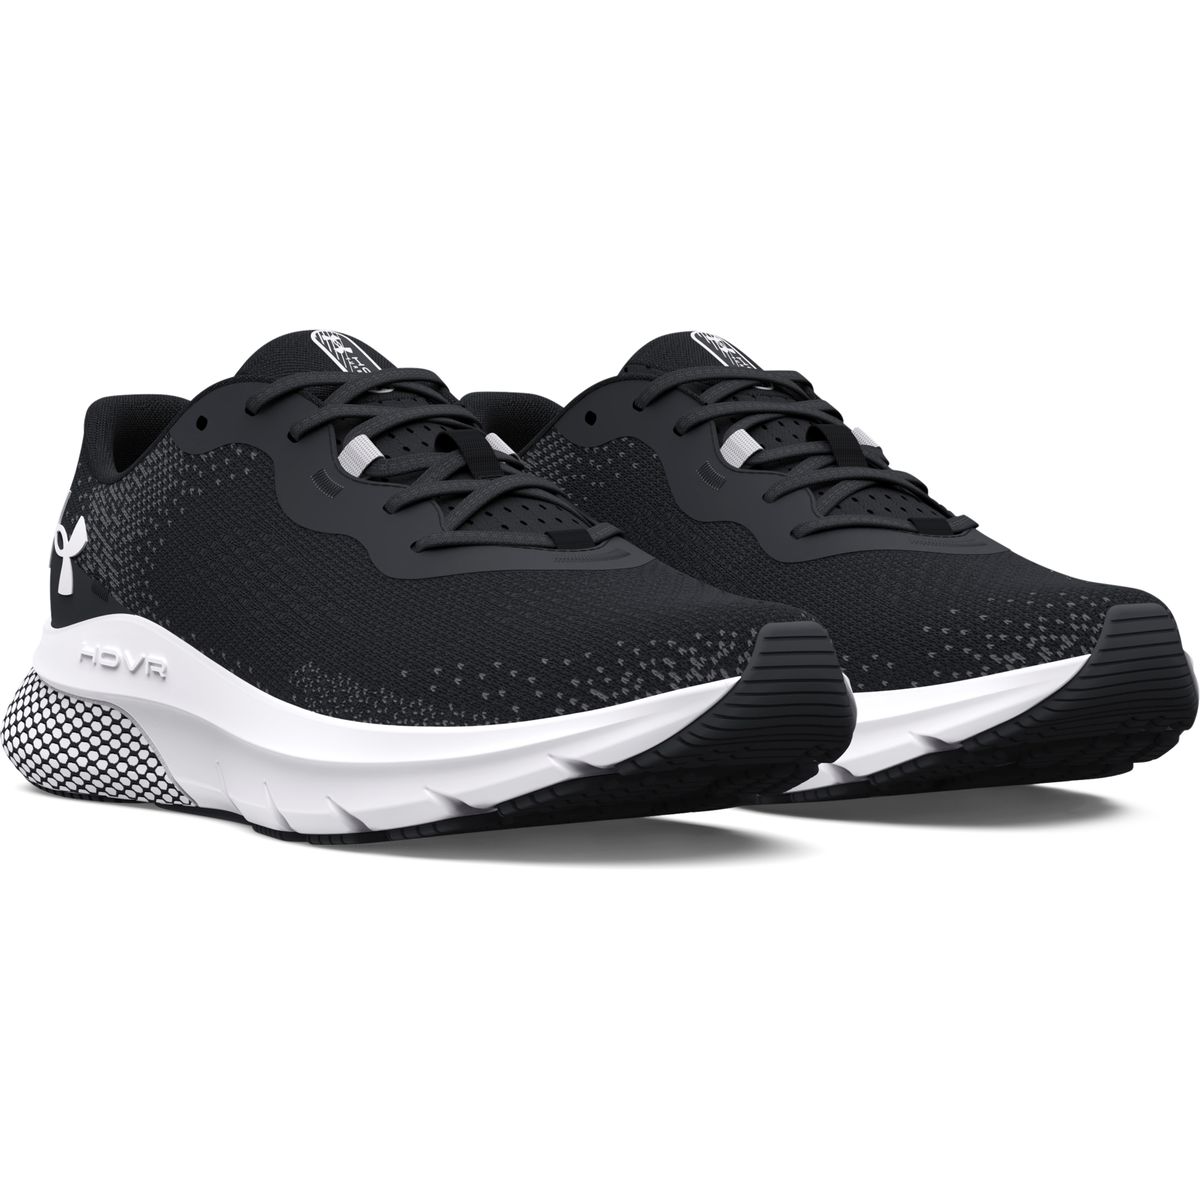 Under Armour Men's HOVR Turbulence 2 Road Running Shoes | Shop Today ...